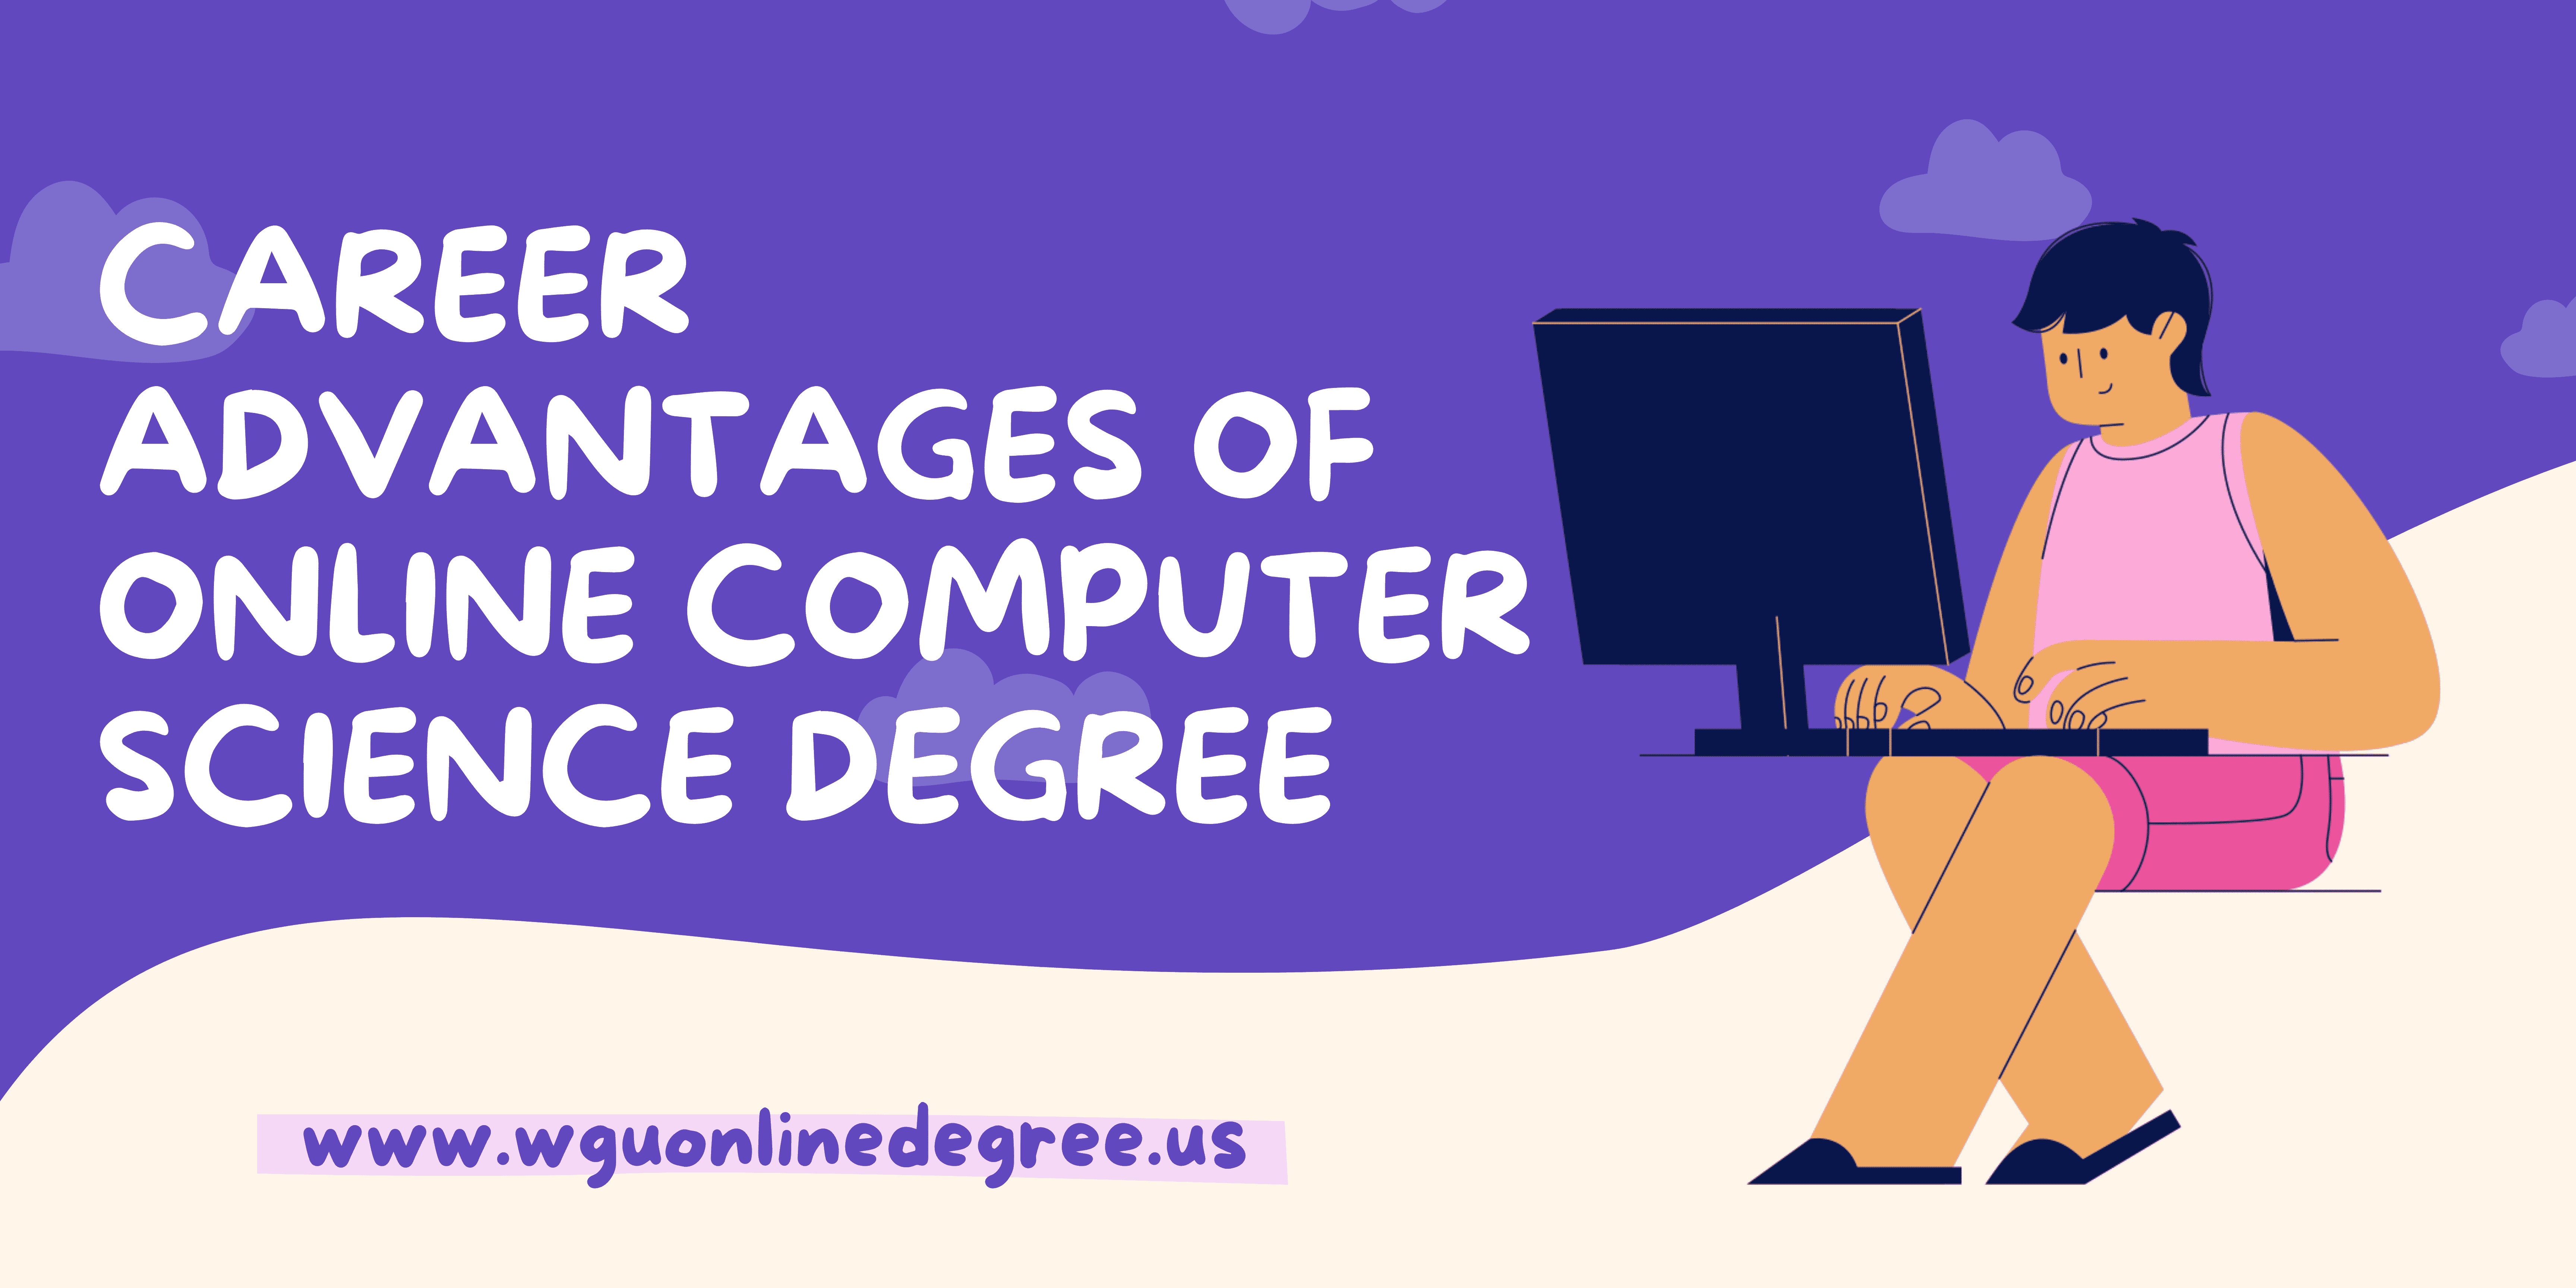 Career Advantages of Online Computer Science Degree